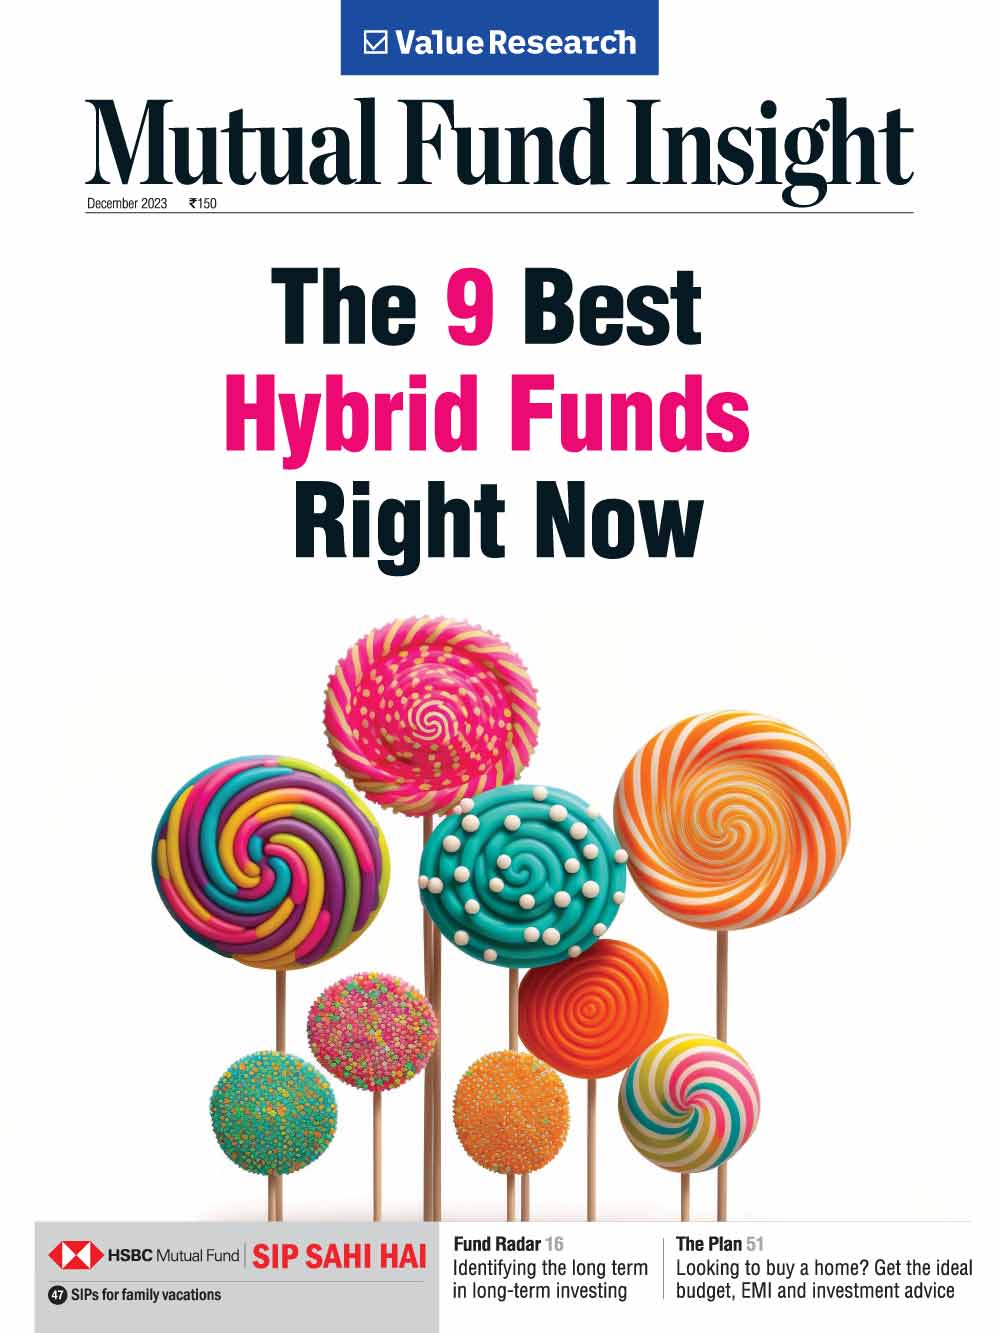 Fund　Research　India's　Mutual　Magazine　Fund　leading　Value　Mutual　Insight